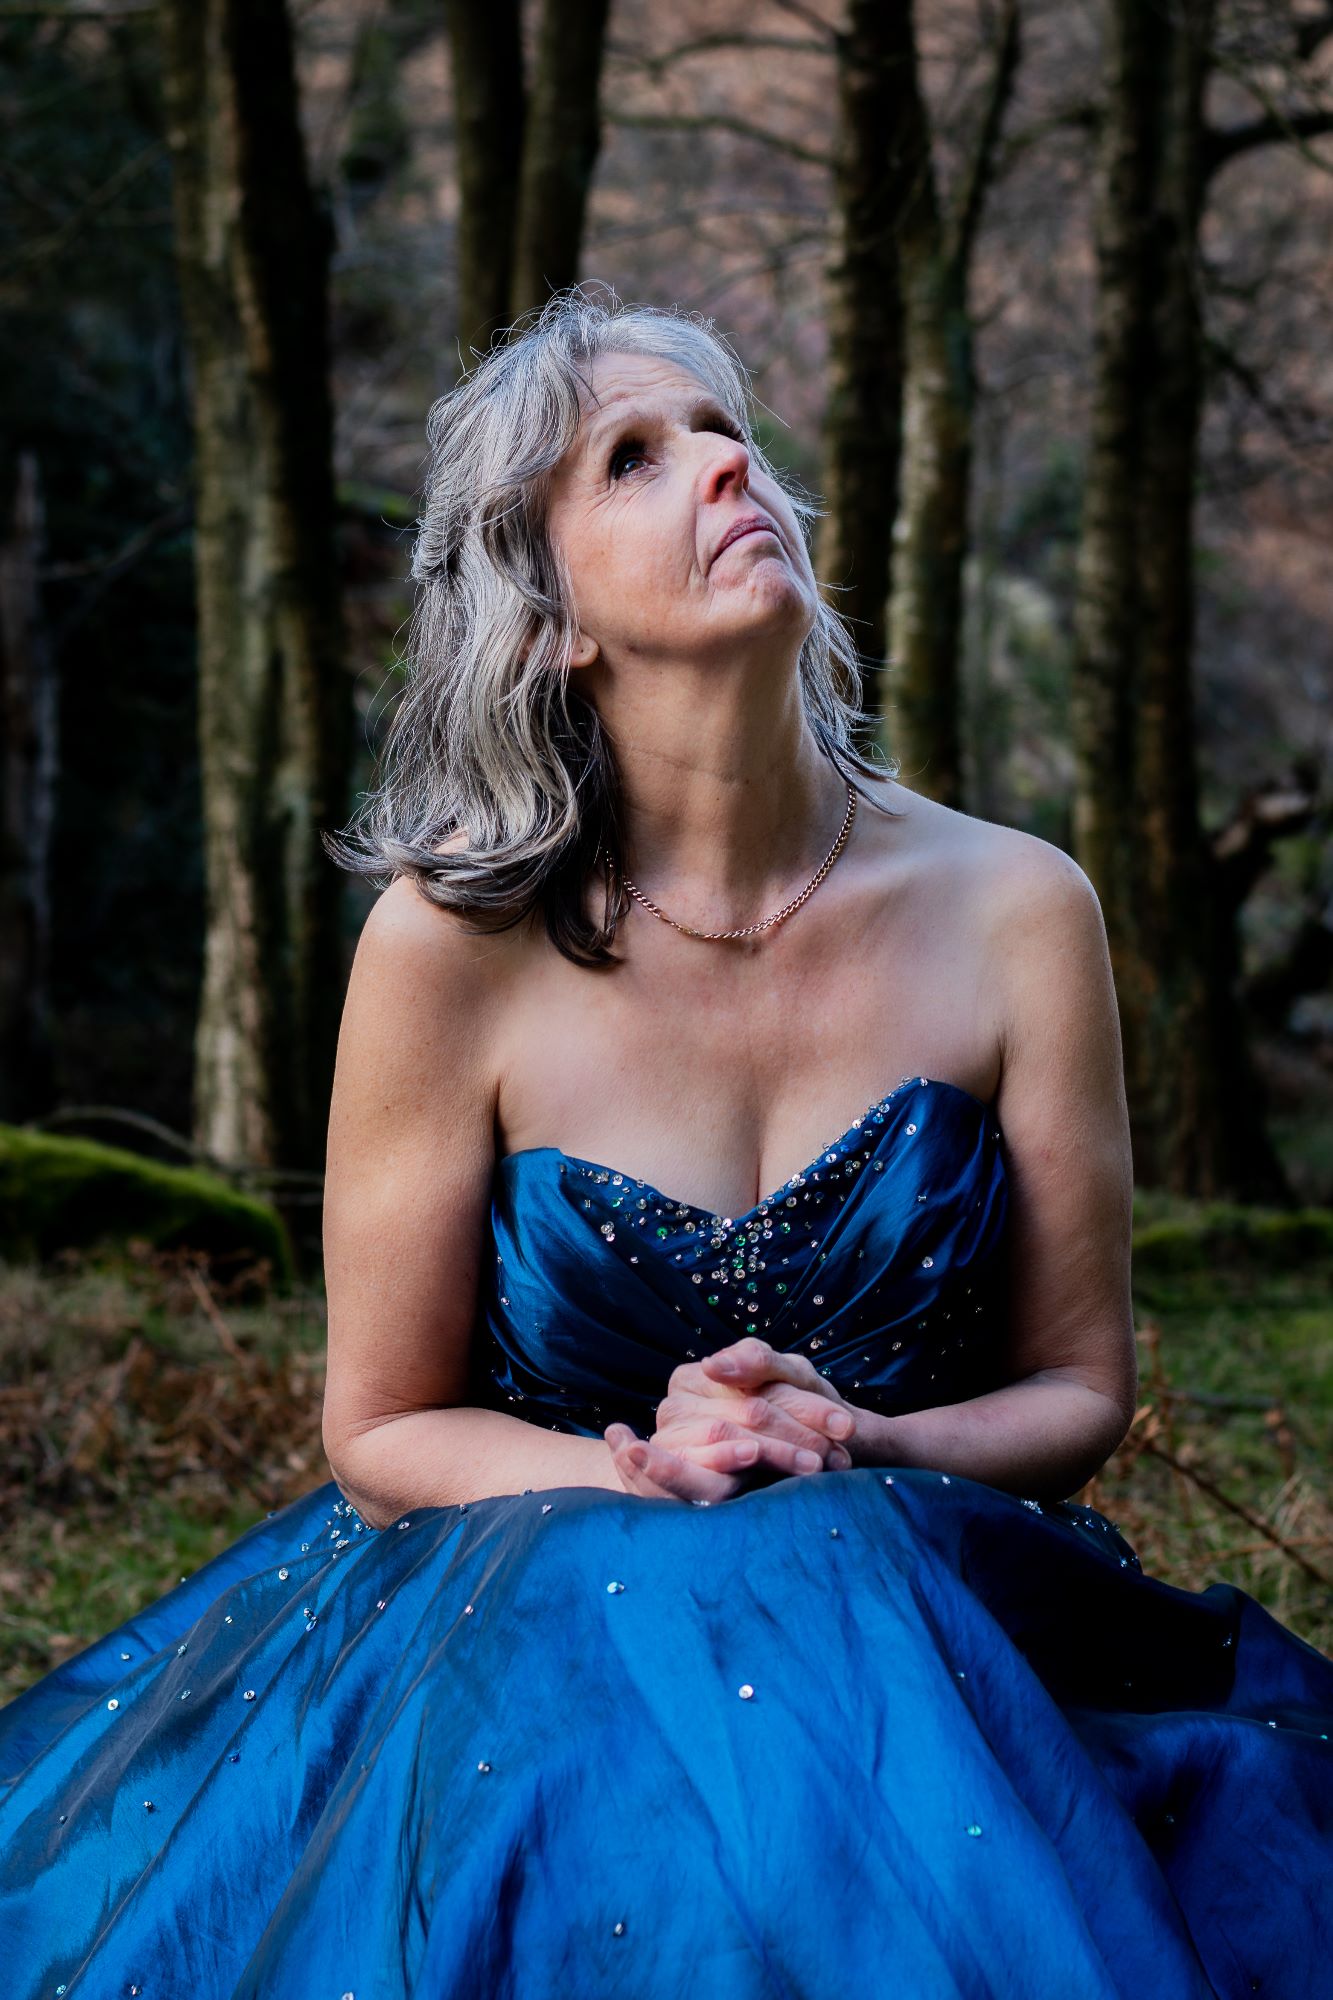 A lady sits on a tree stump in the forest and looks towards the sky. She's wearing a blue ballgown and looks like a real life cinderella